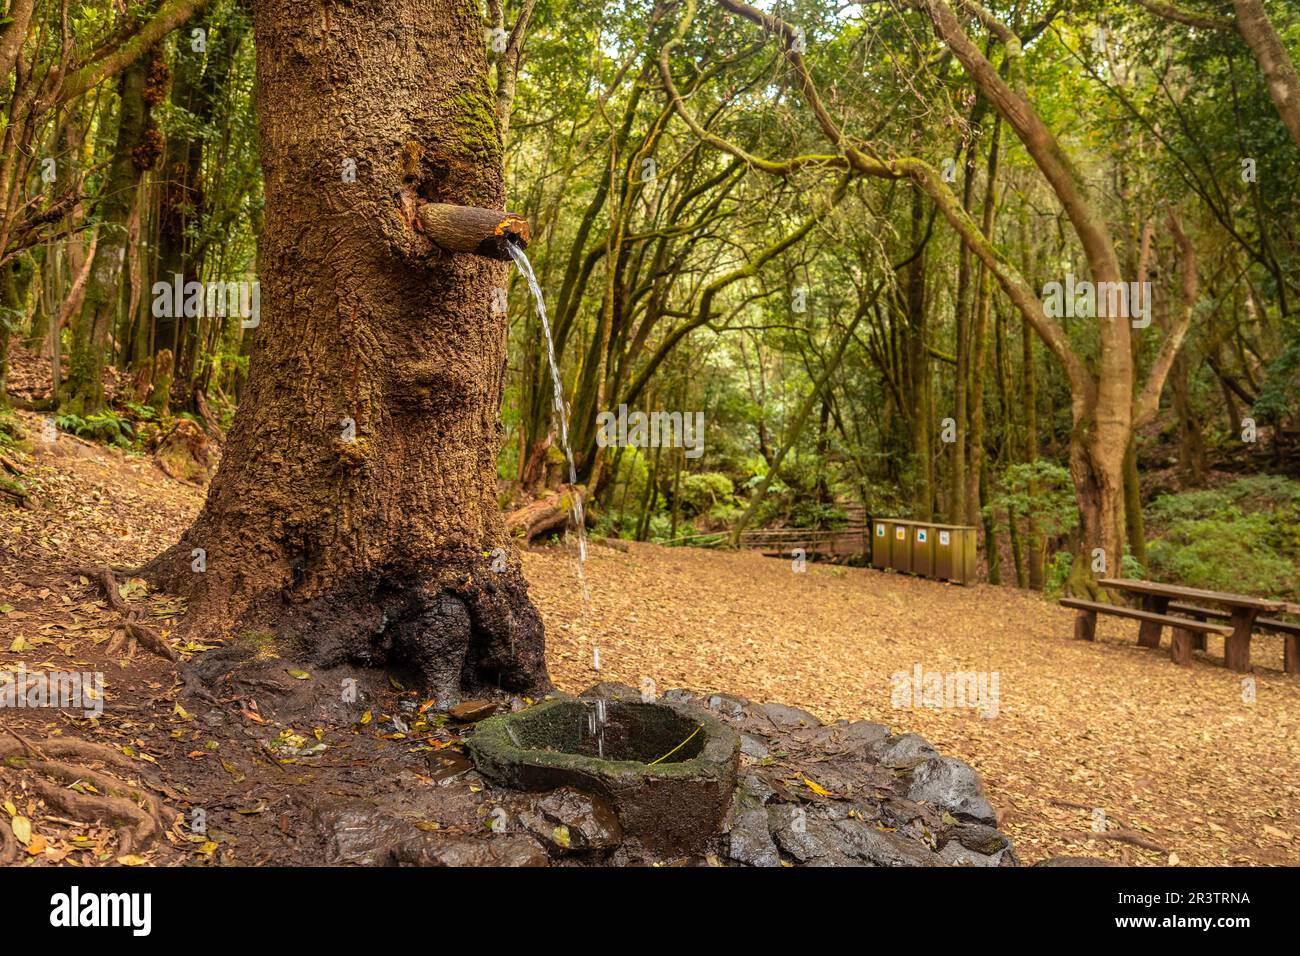 A water source next to Arroyo del Cedro in the evergreen cloud forest of Garajonay National Park, La Gomera, Canary Islands, Spain Stock Photo